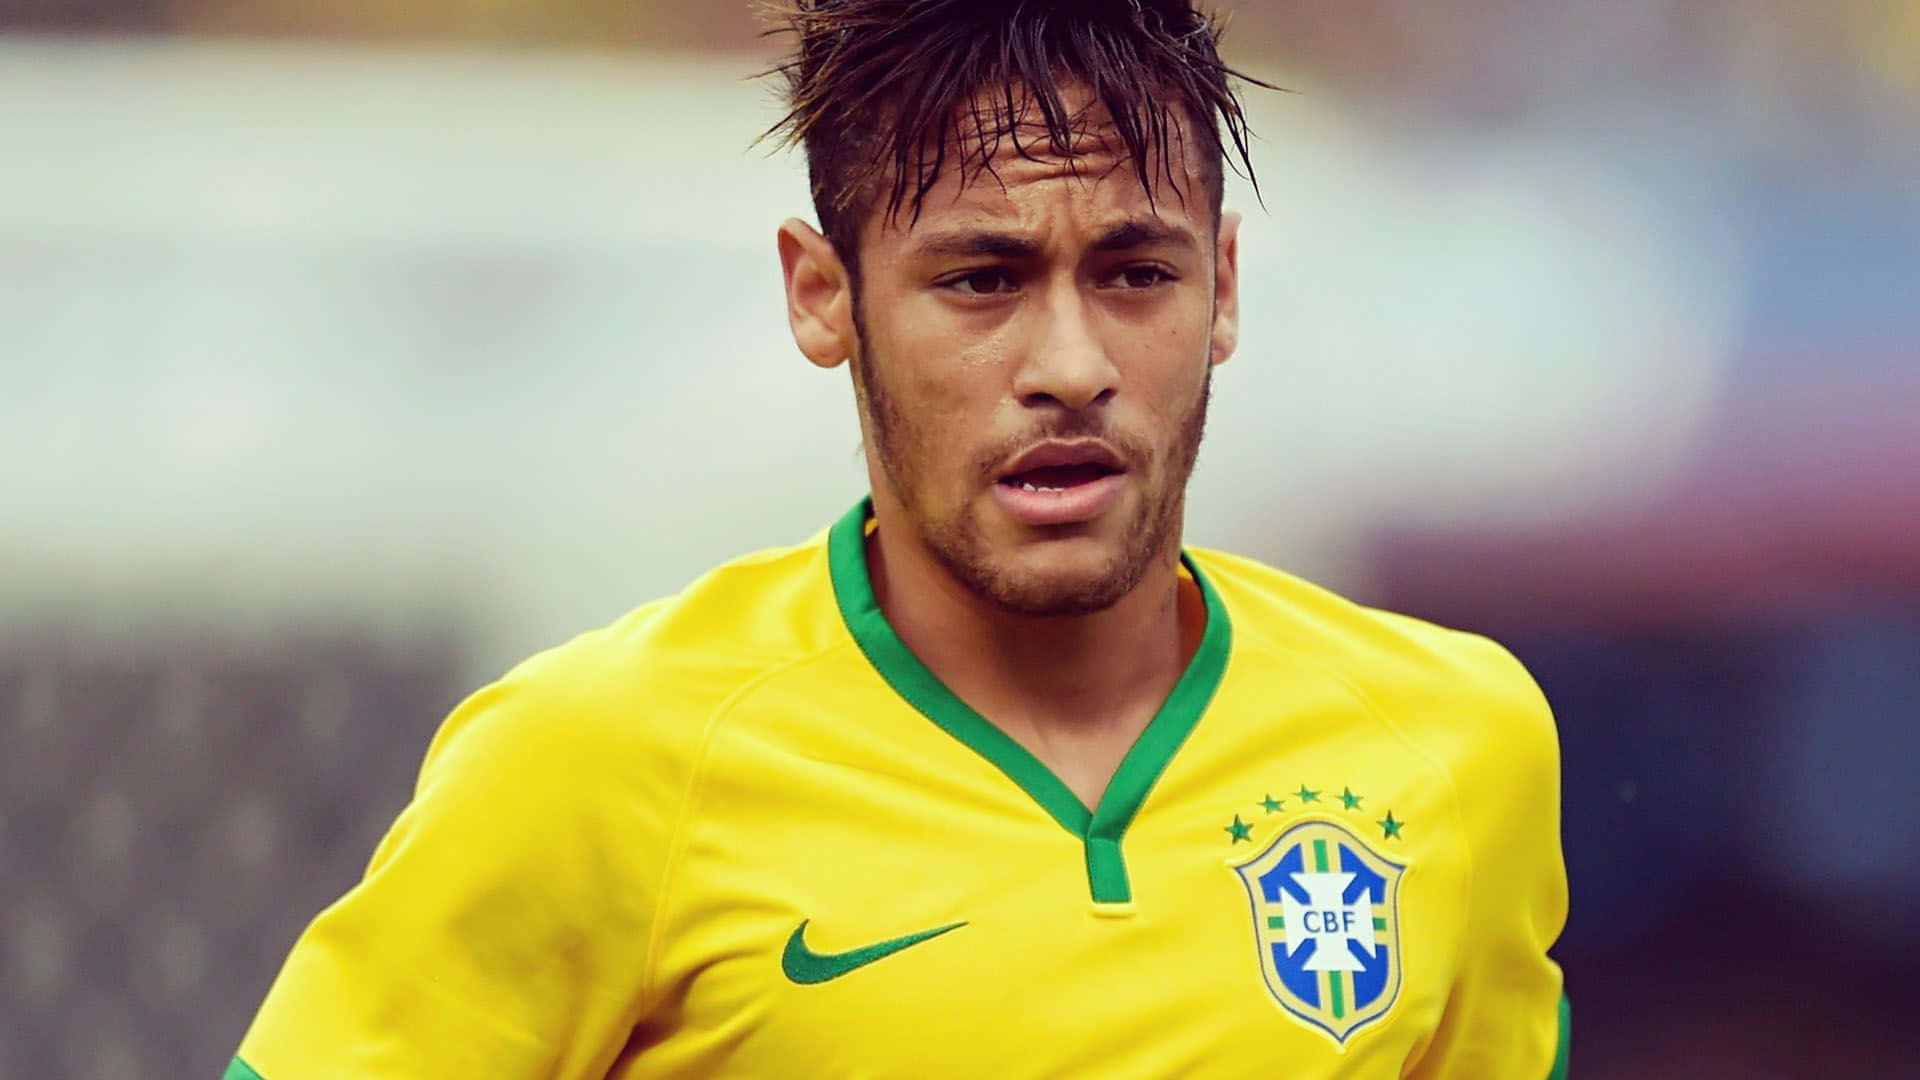 Image  Professional soccer player Neymar on the field.